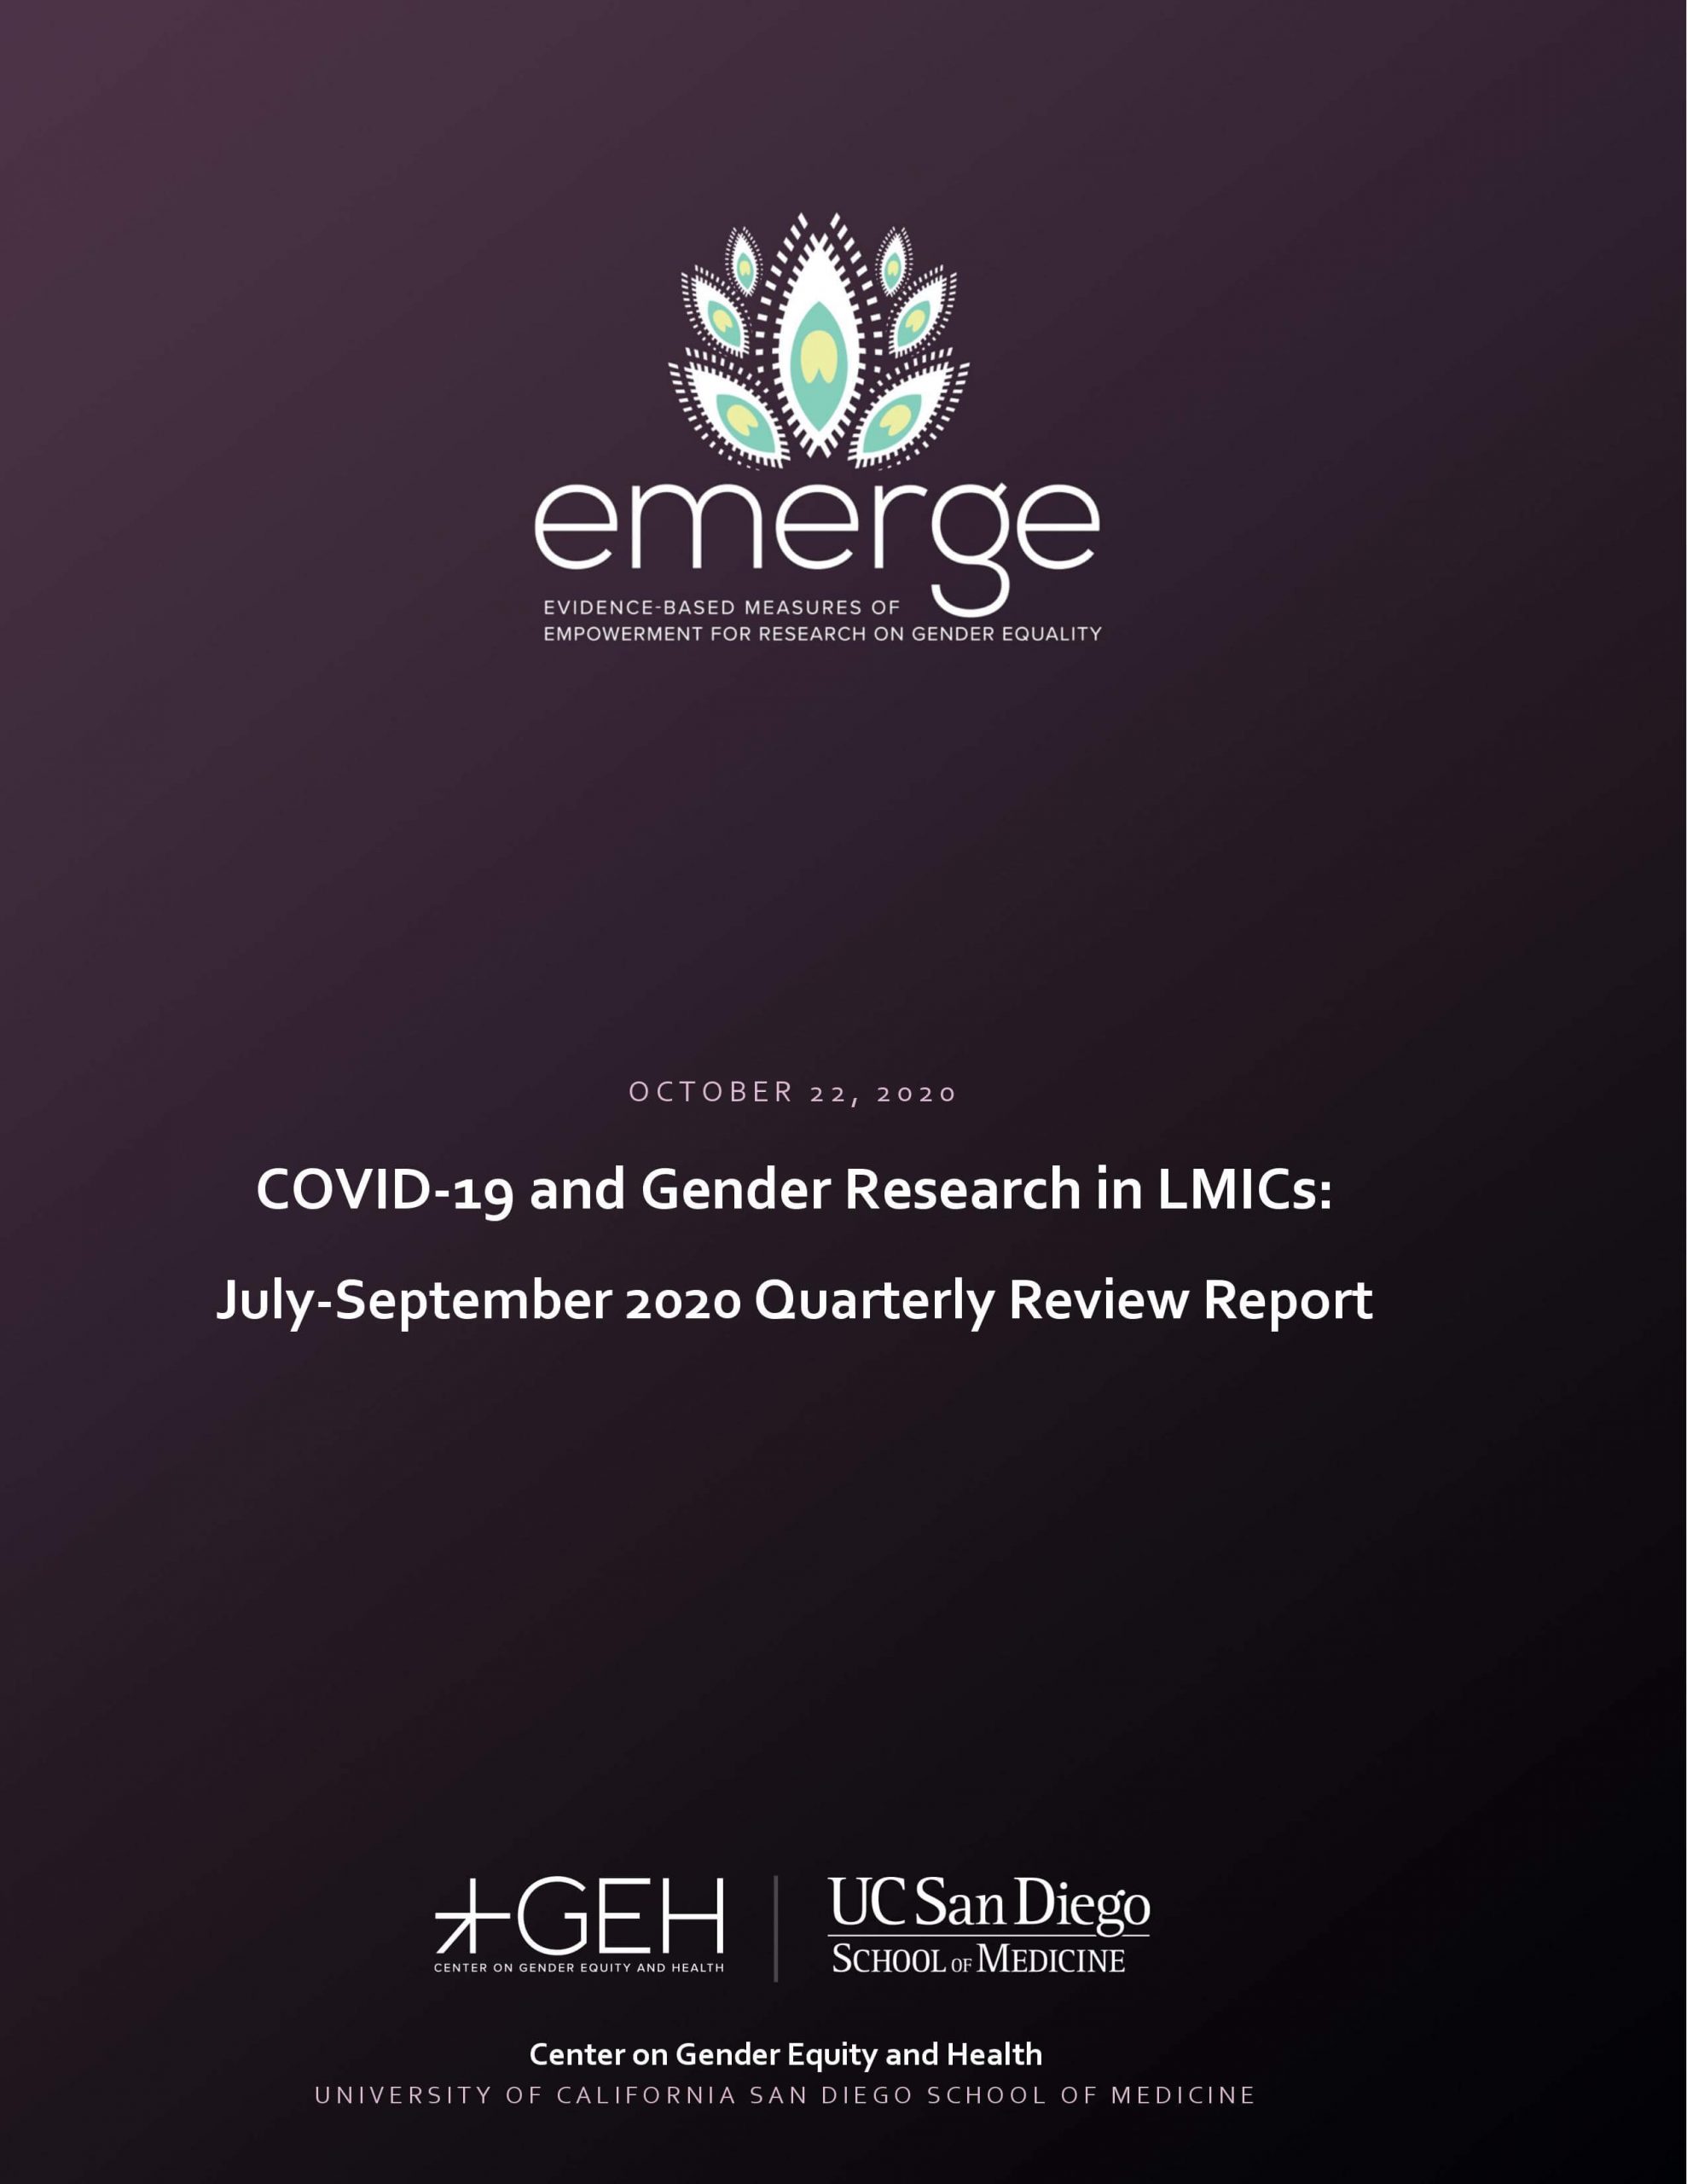 COVID-19 and Gender Research in LMICs